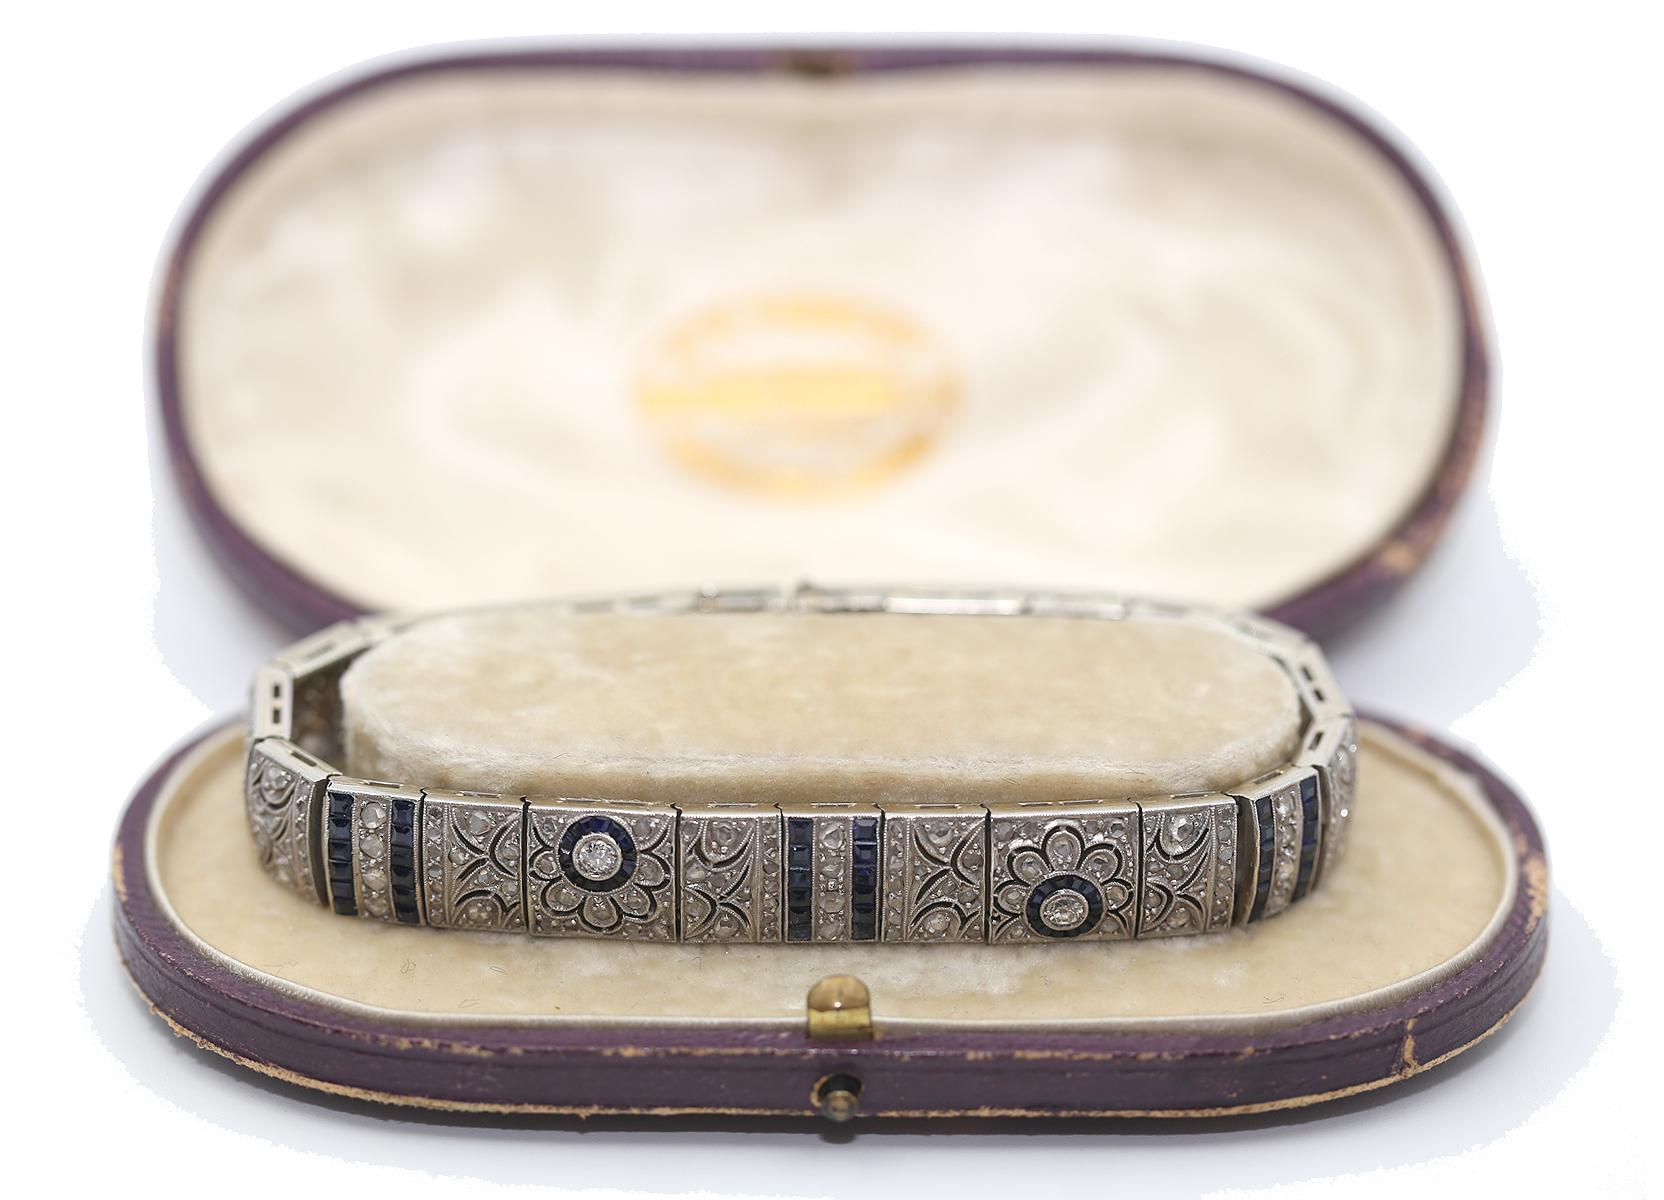 Art Deco Sapphire Diamond Bracelet 18K Gold, 1890 

A truly fine and highly collectable bracelet, it is perfect for special occasions and a great addition to any jewelry collection. 

An Art Deco, French bracelet with floral designs and millegrain